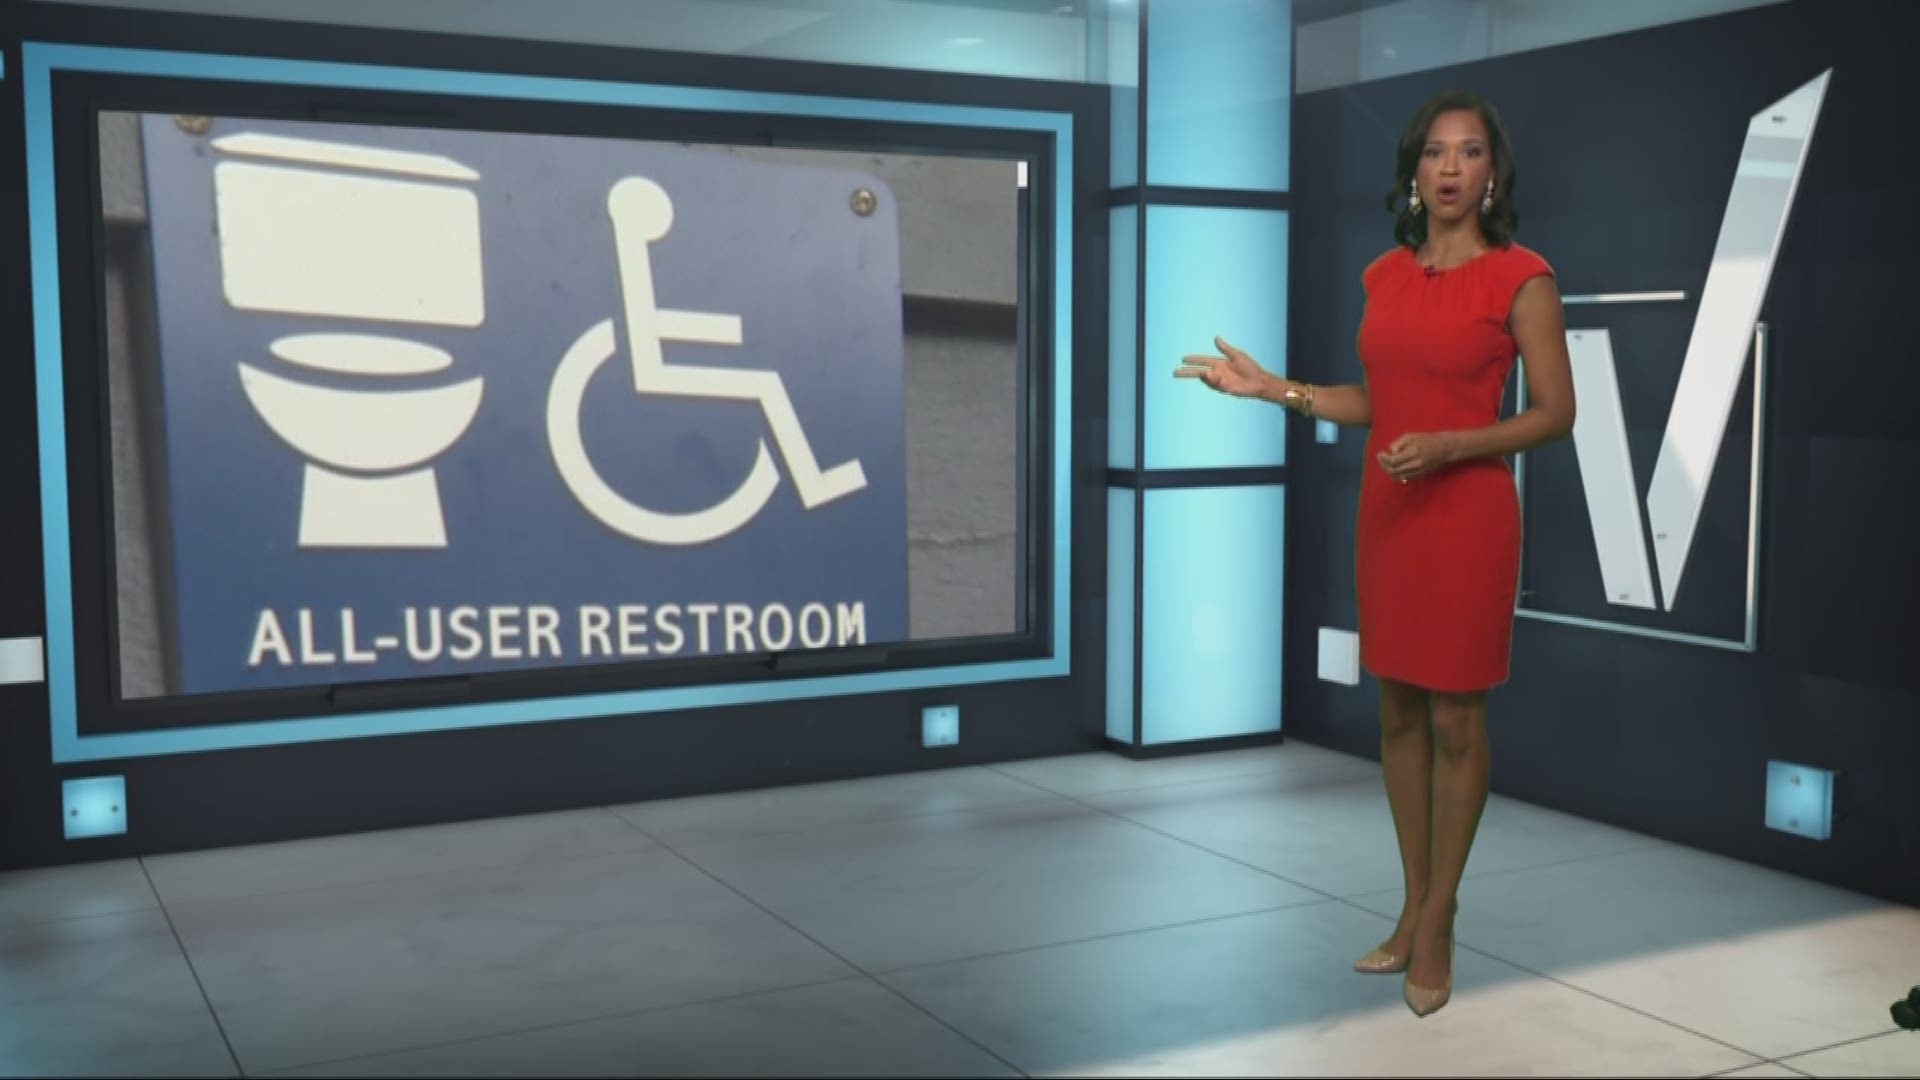 A viewer wanted to know if handicapped bathroom stalls are like handicapped parking spaces. Is it possible to be fined for using them or are they open to anyone?